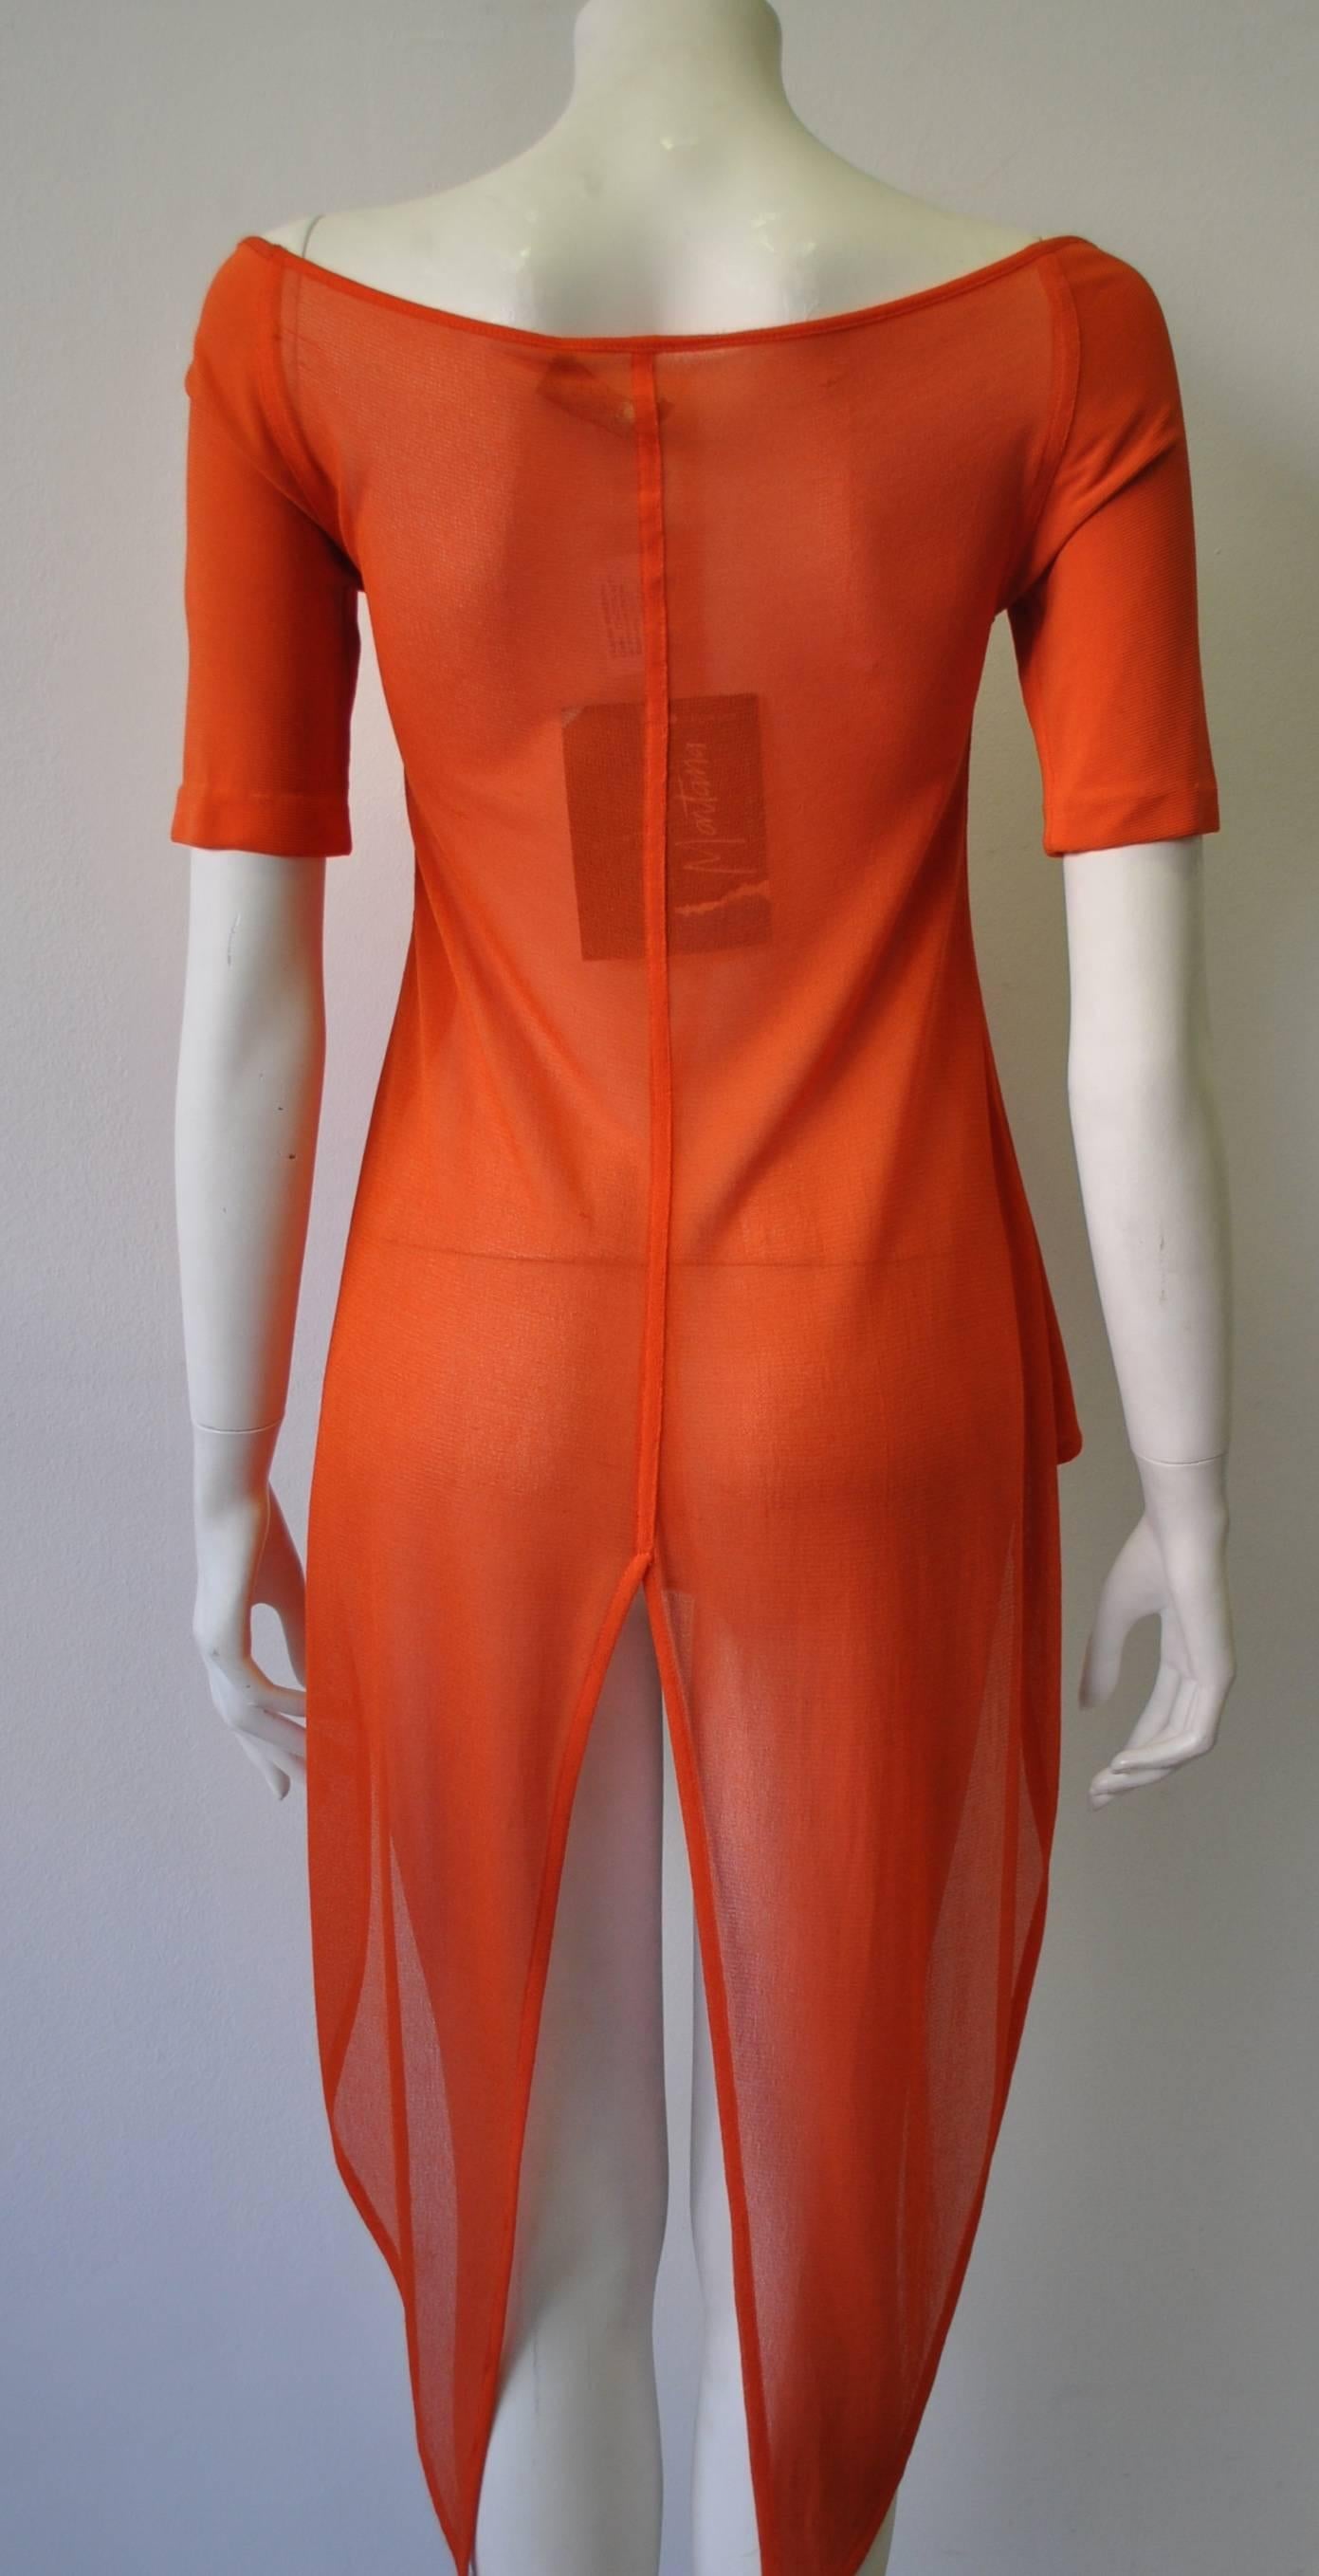 Women's Very Rare Claude Montana Knitwear Bright Orange High-Low Top For Sale